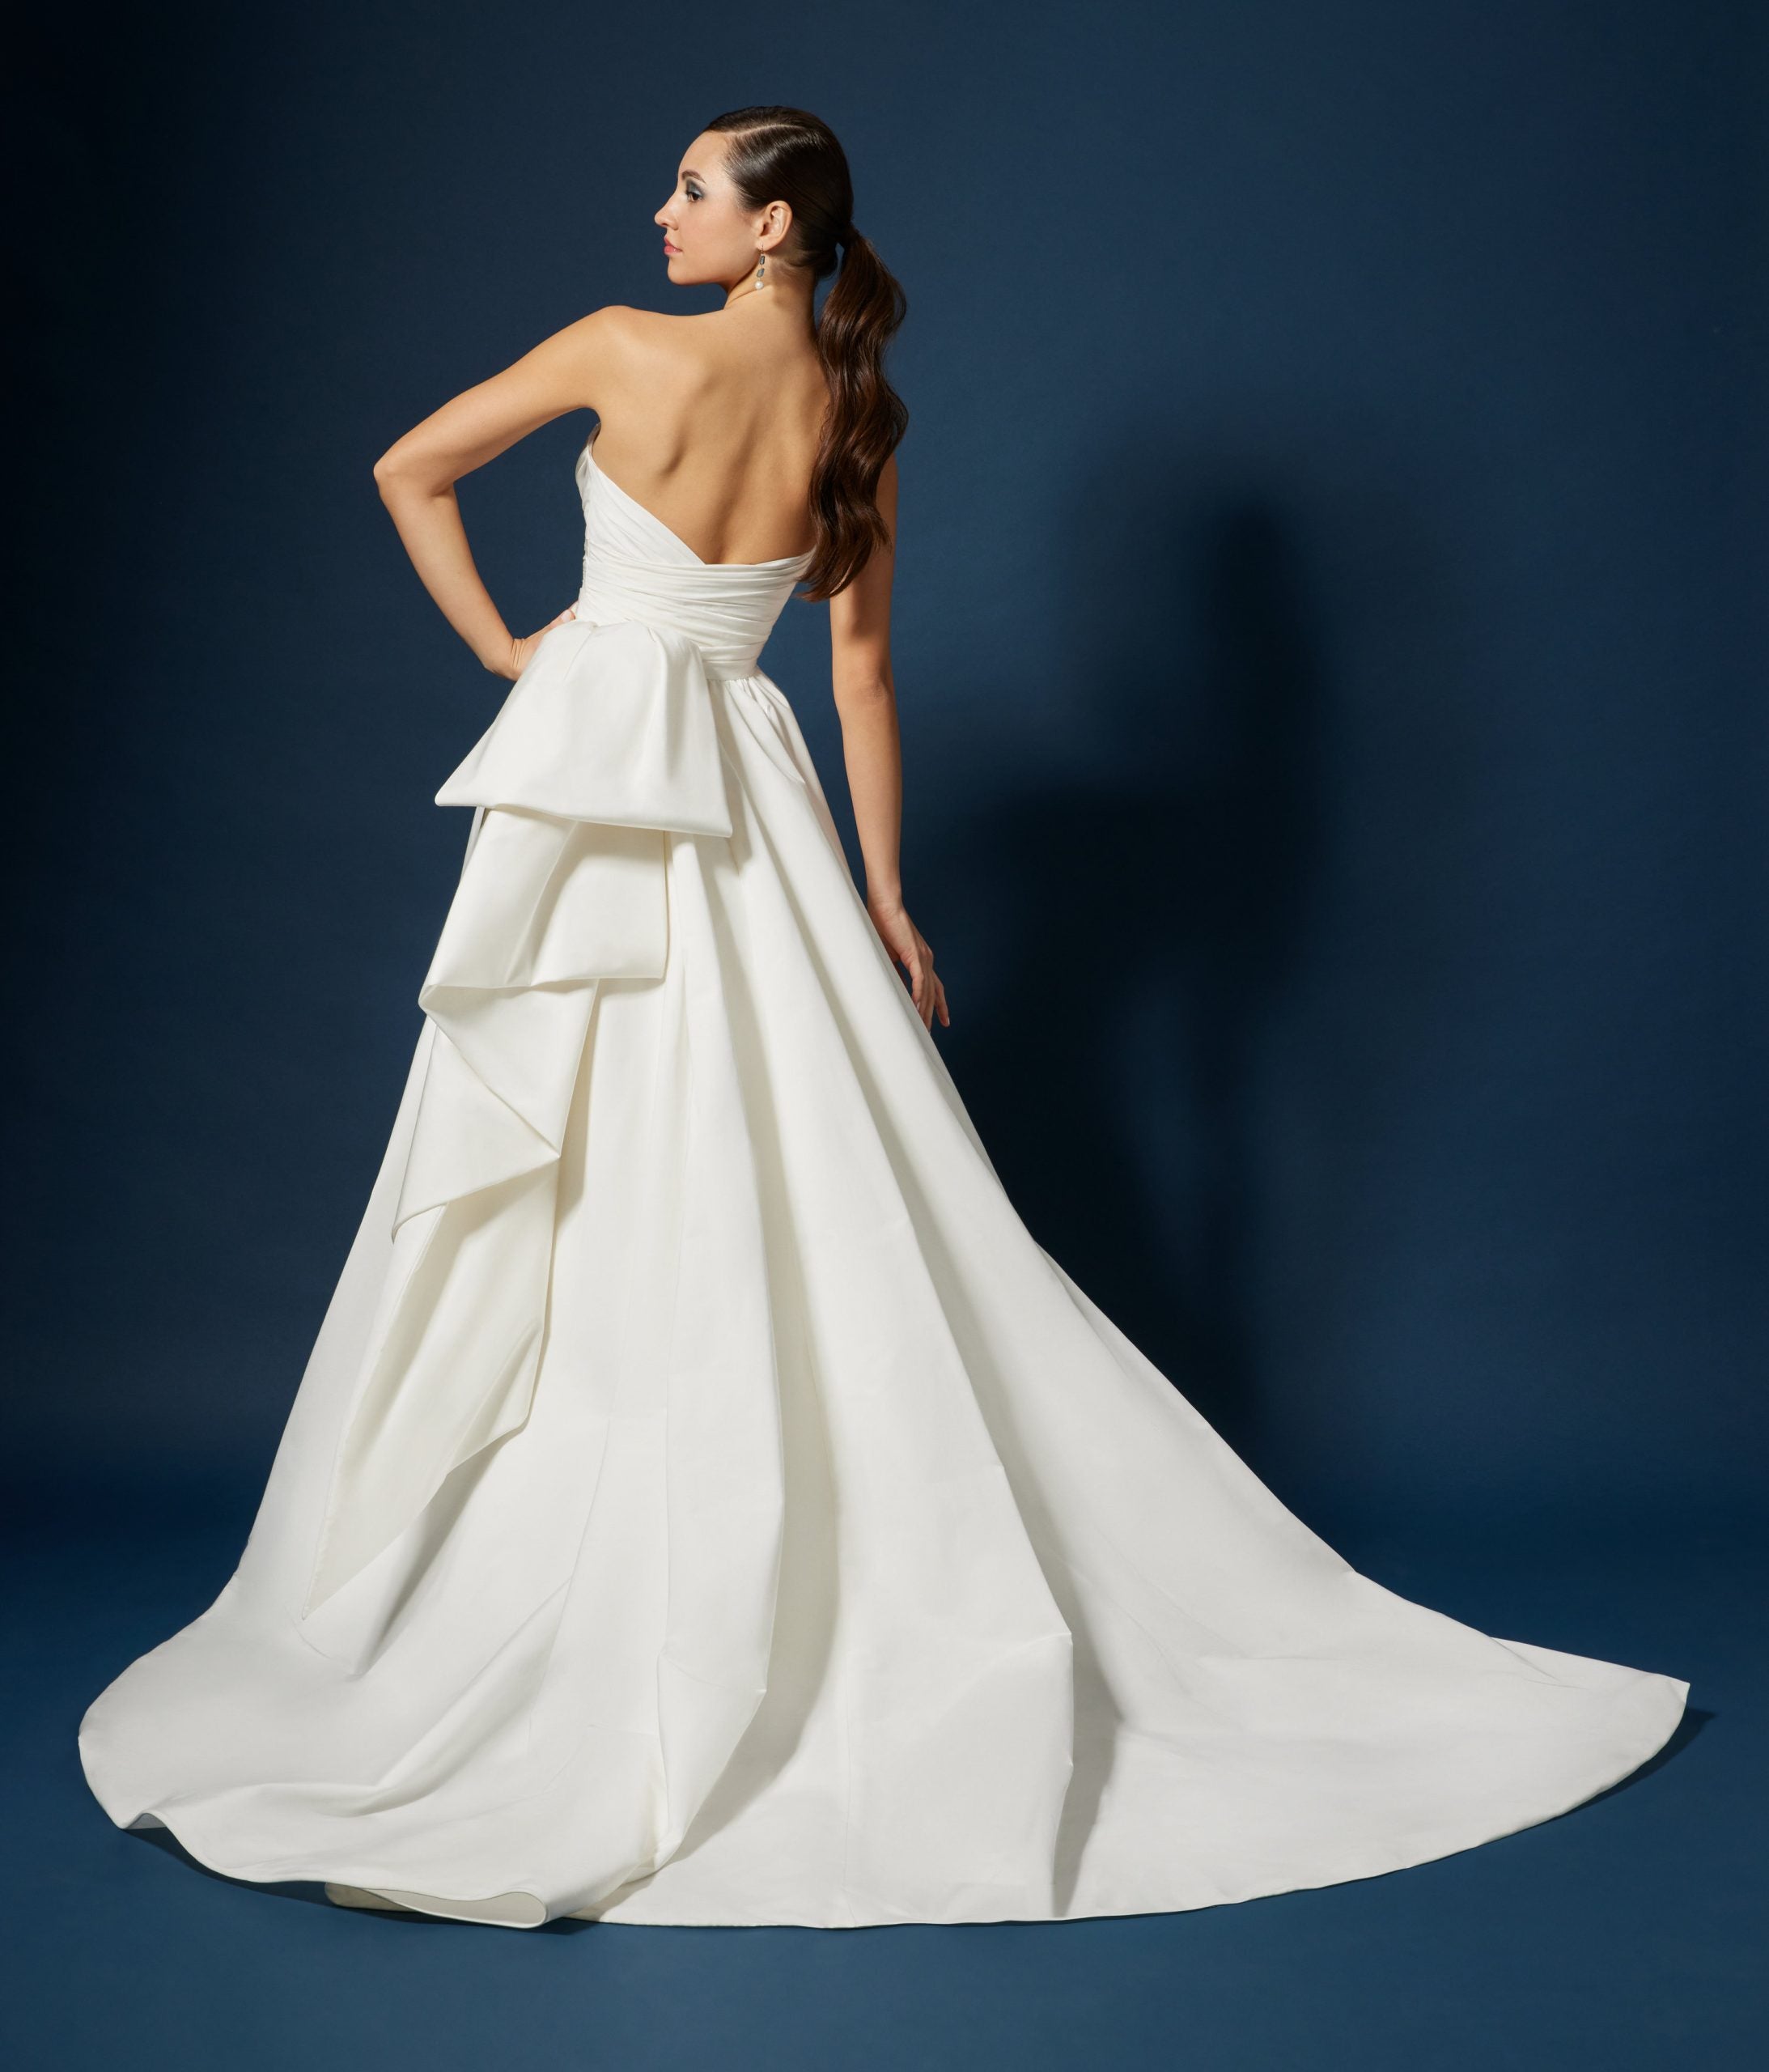 Strapless Fit And Flare Wedding Dress With Detachable Overskirt by Lazaro - Image 2